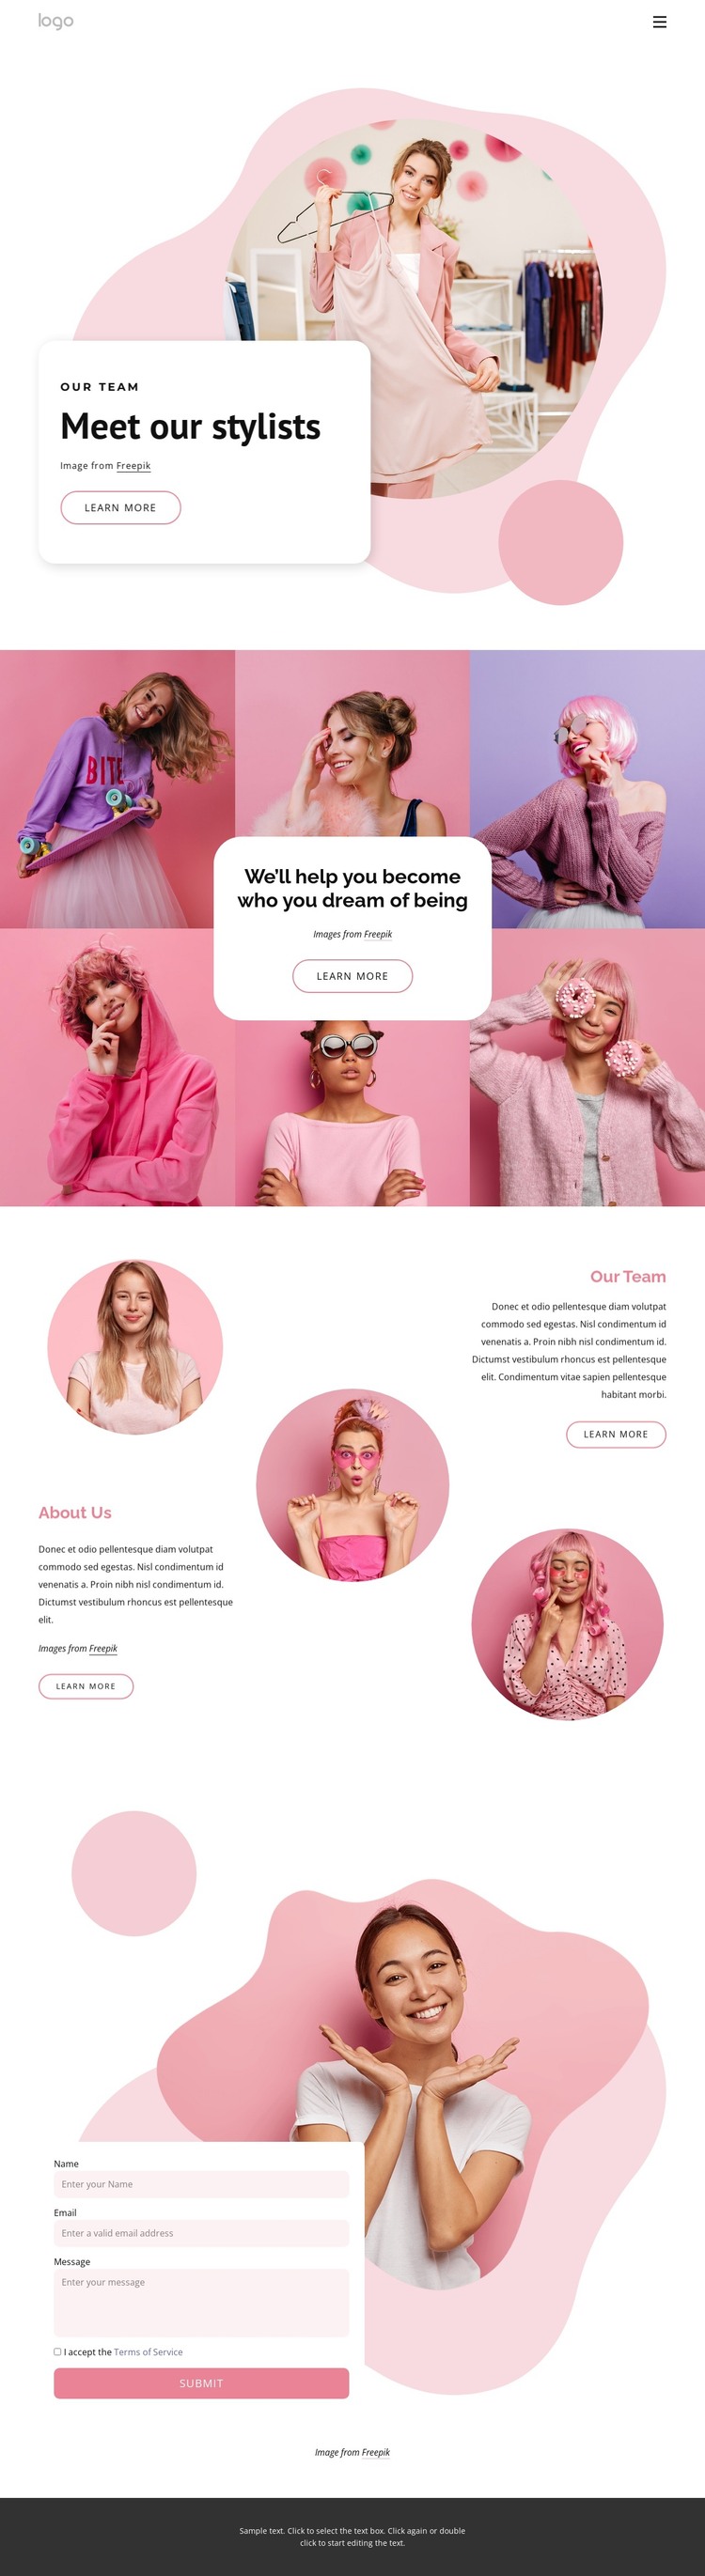 Meet our stylists HTML Template